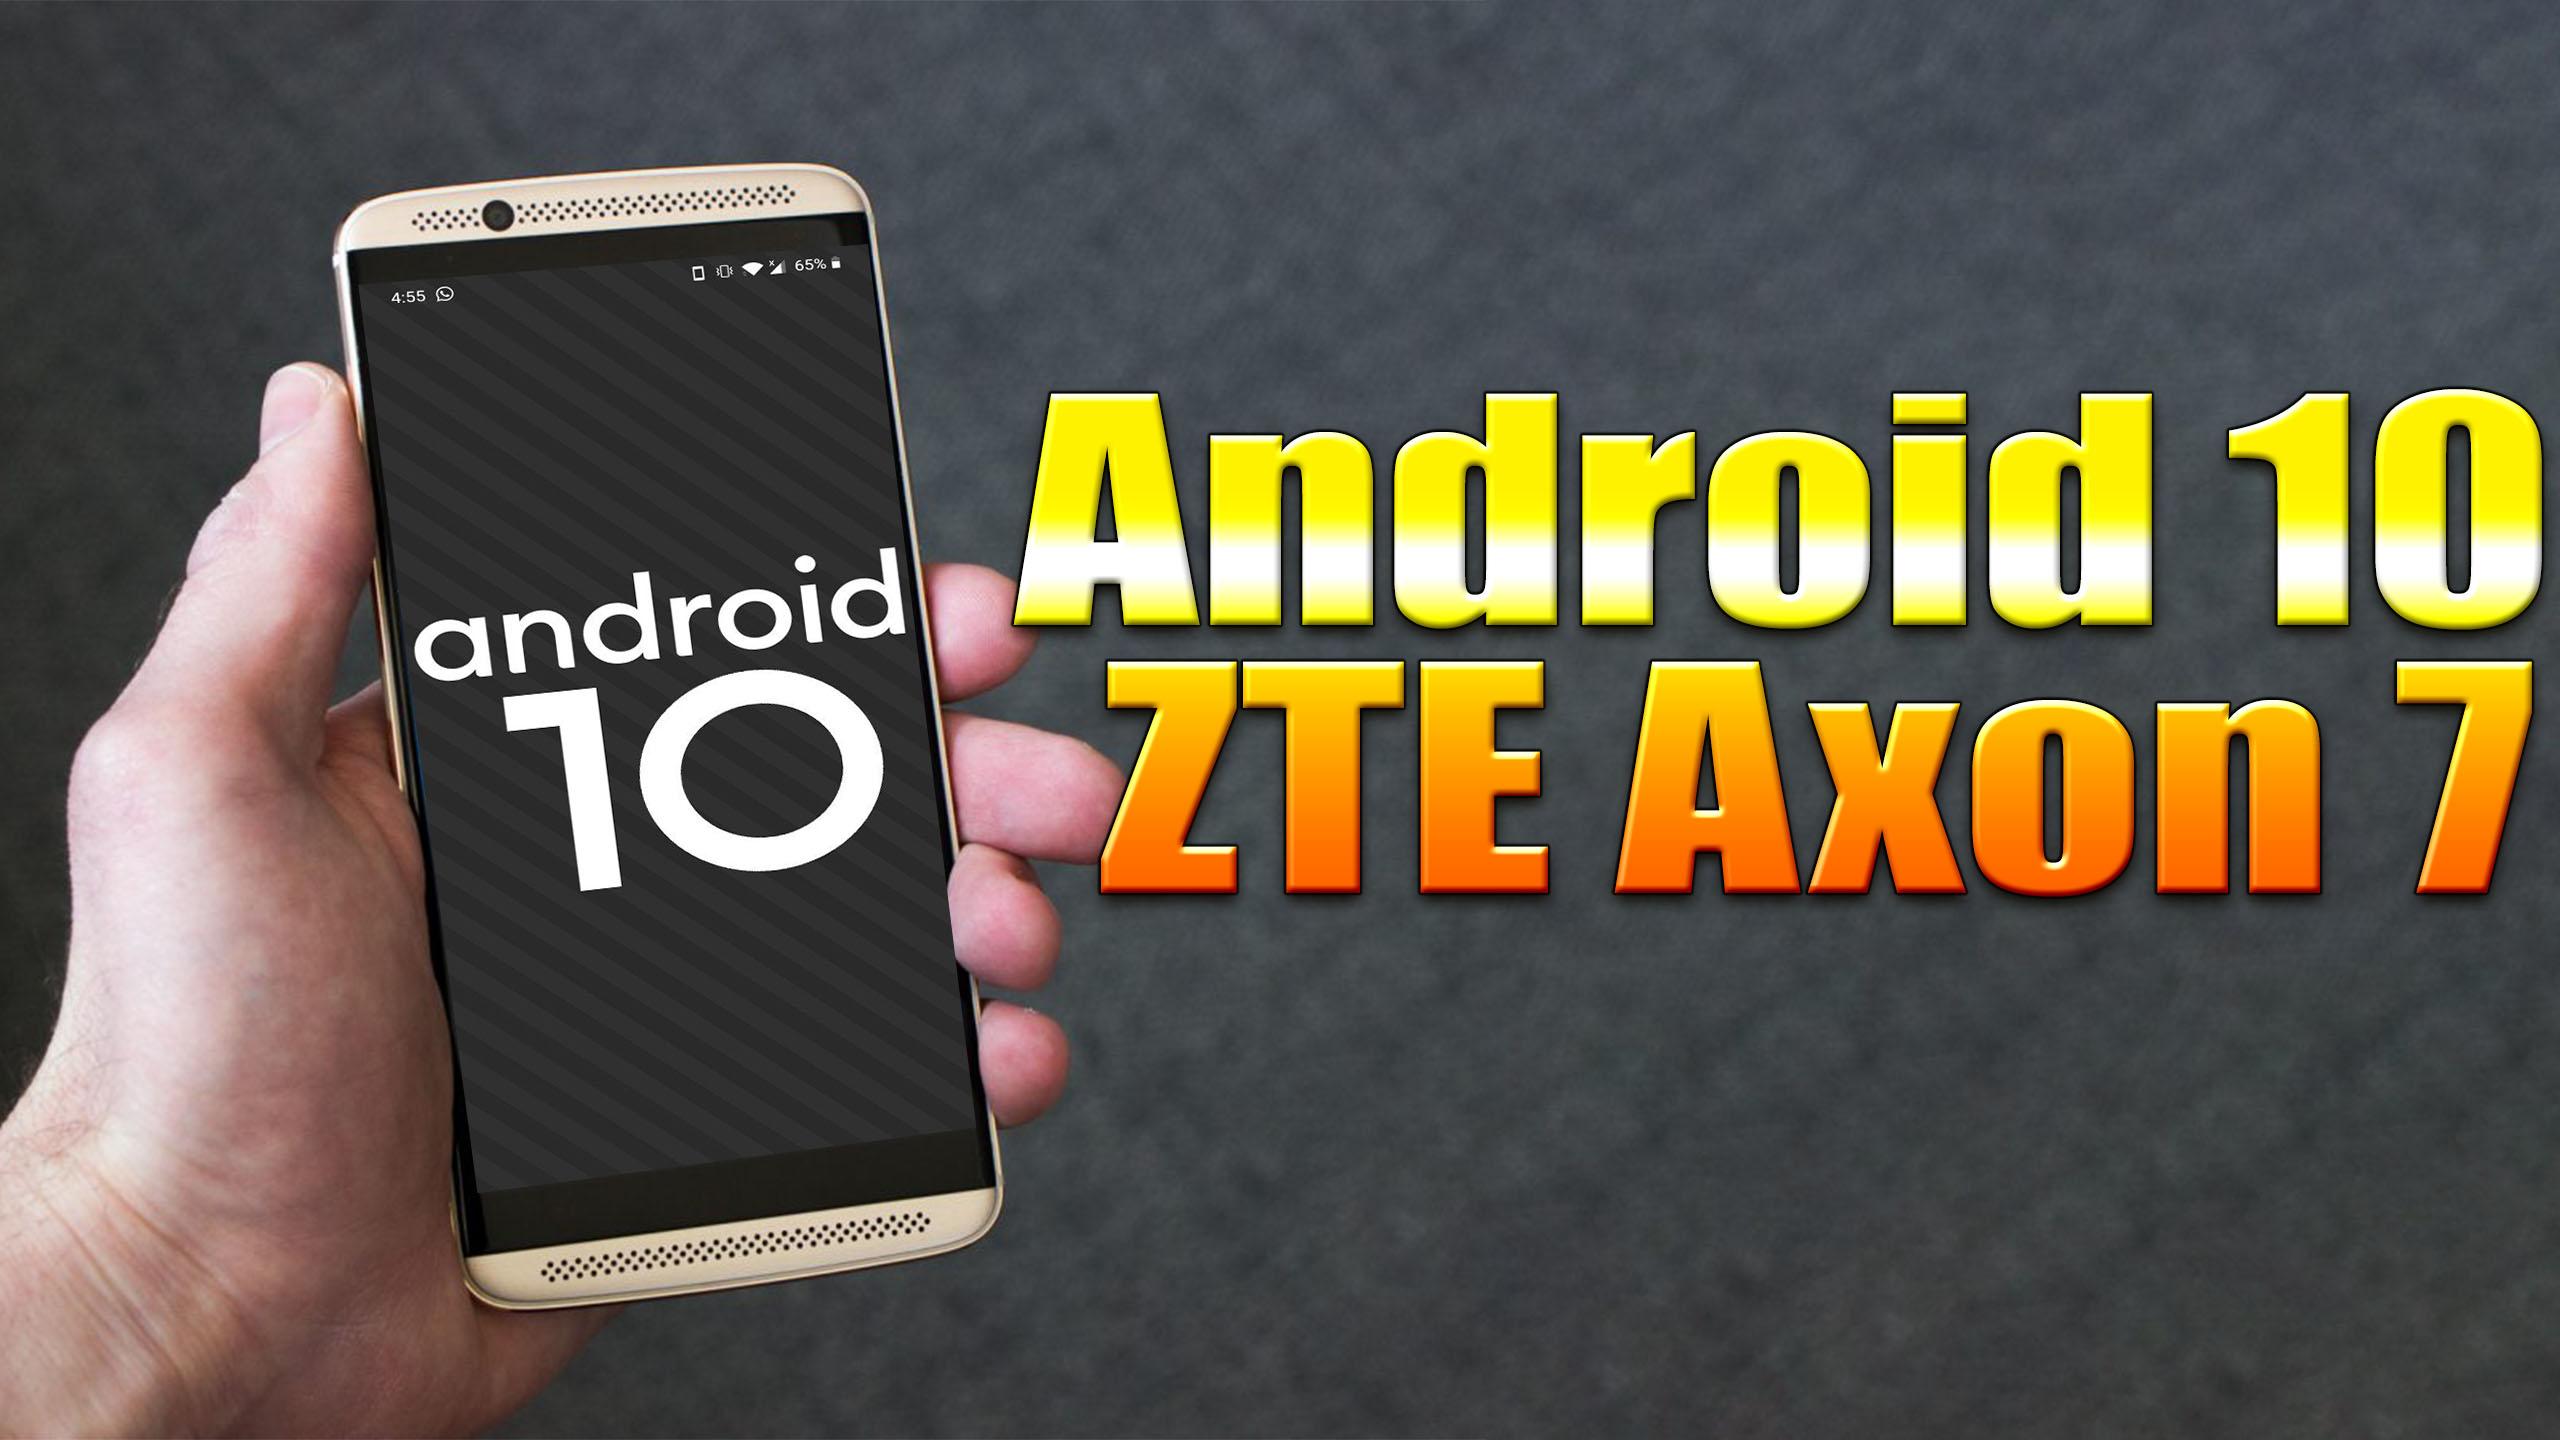 Install Android 10 On Zte Axon 7 Lineageos 17 How To Guide The Upgrade Guide